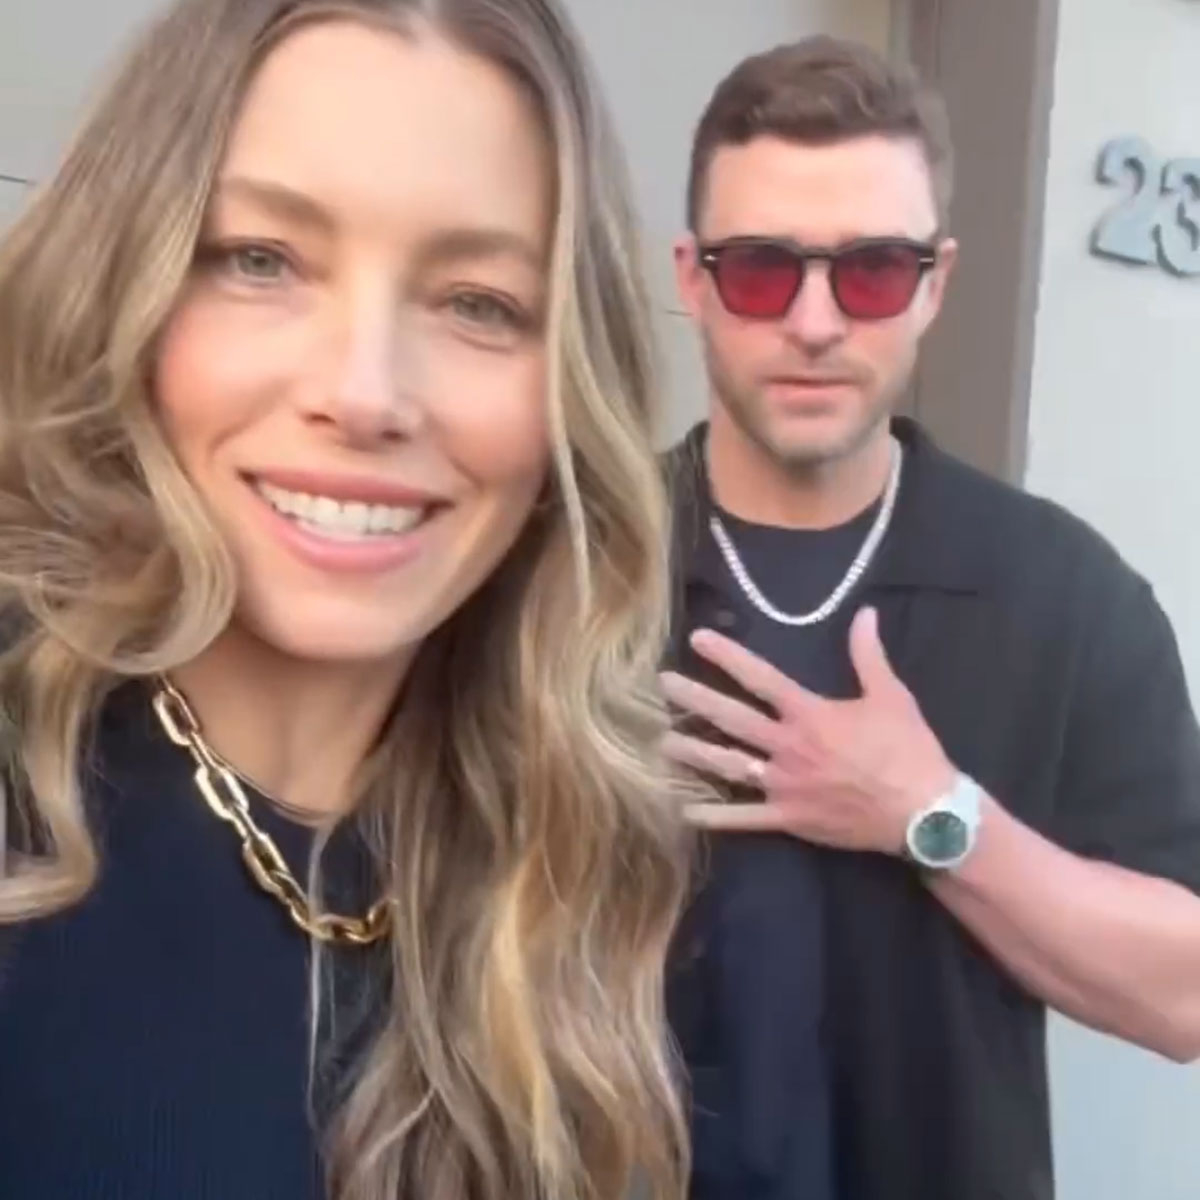 Justin Timberlake Shares Rare Family Photos in Sweet 42nd Birthday Tribute to Jessica Biel